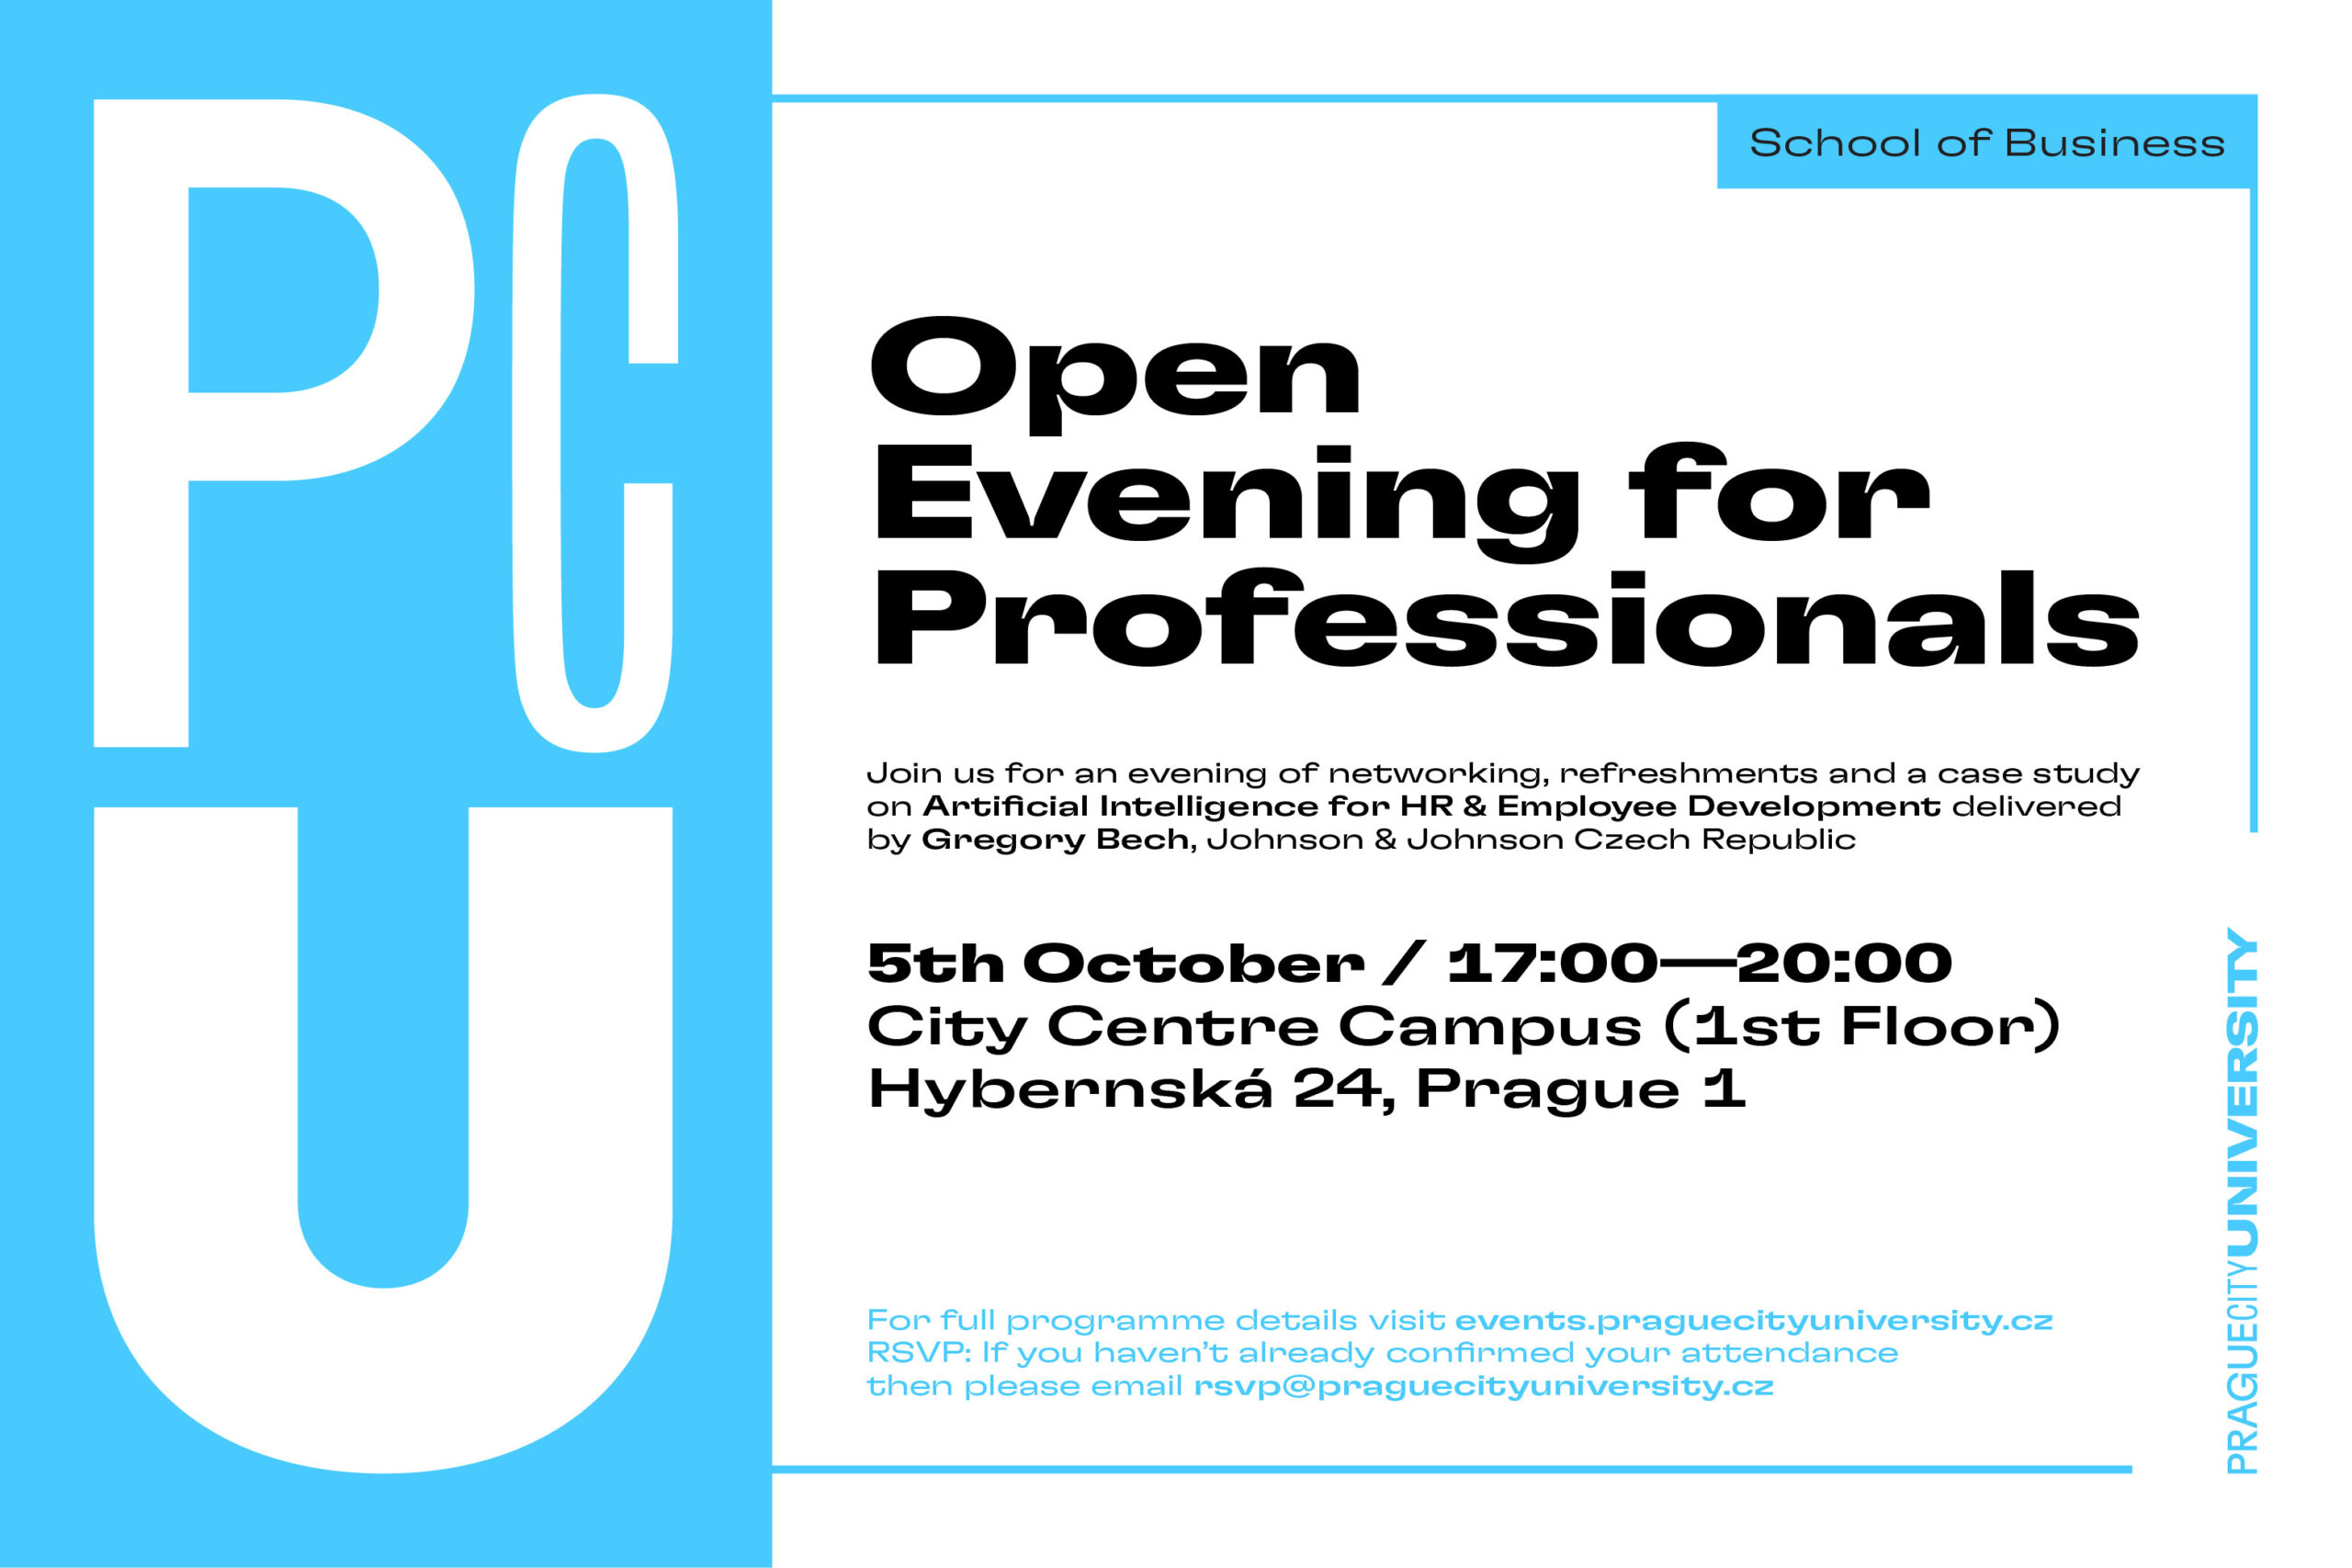 PCU Open Evening for Professionals